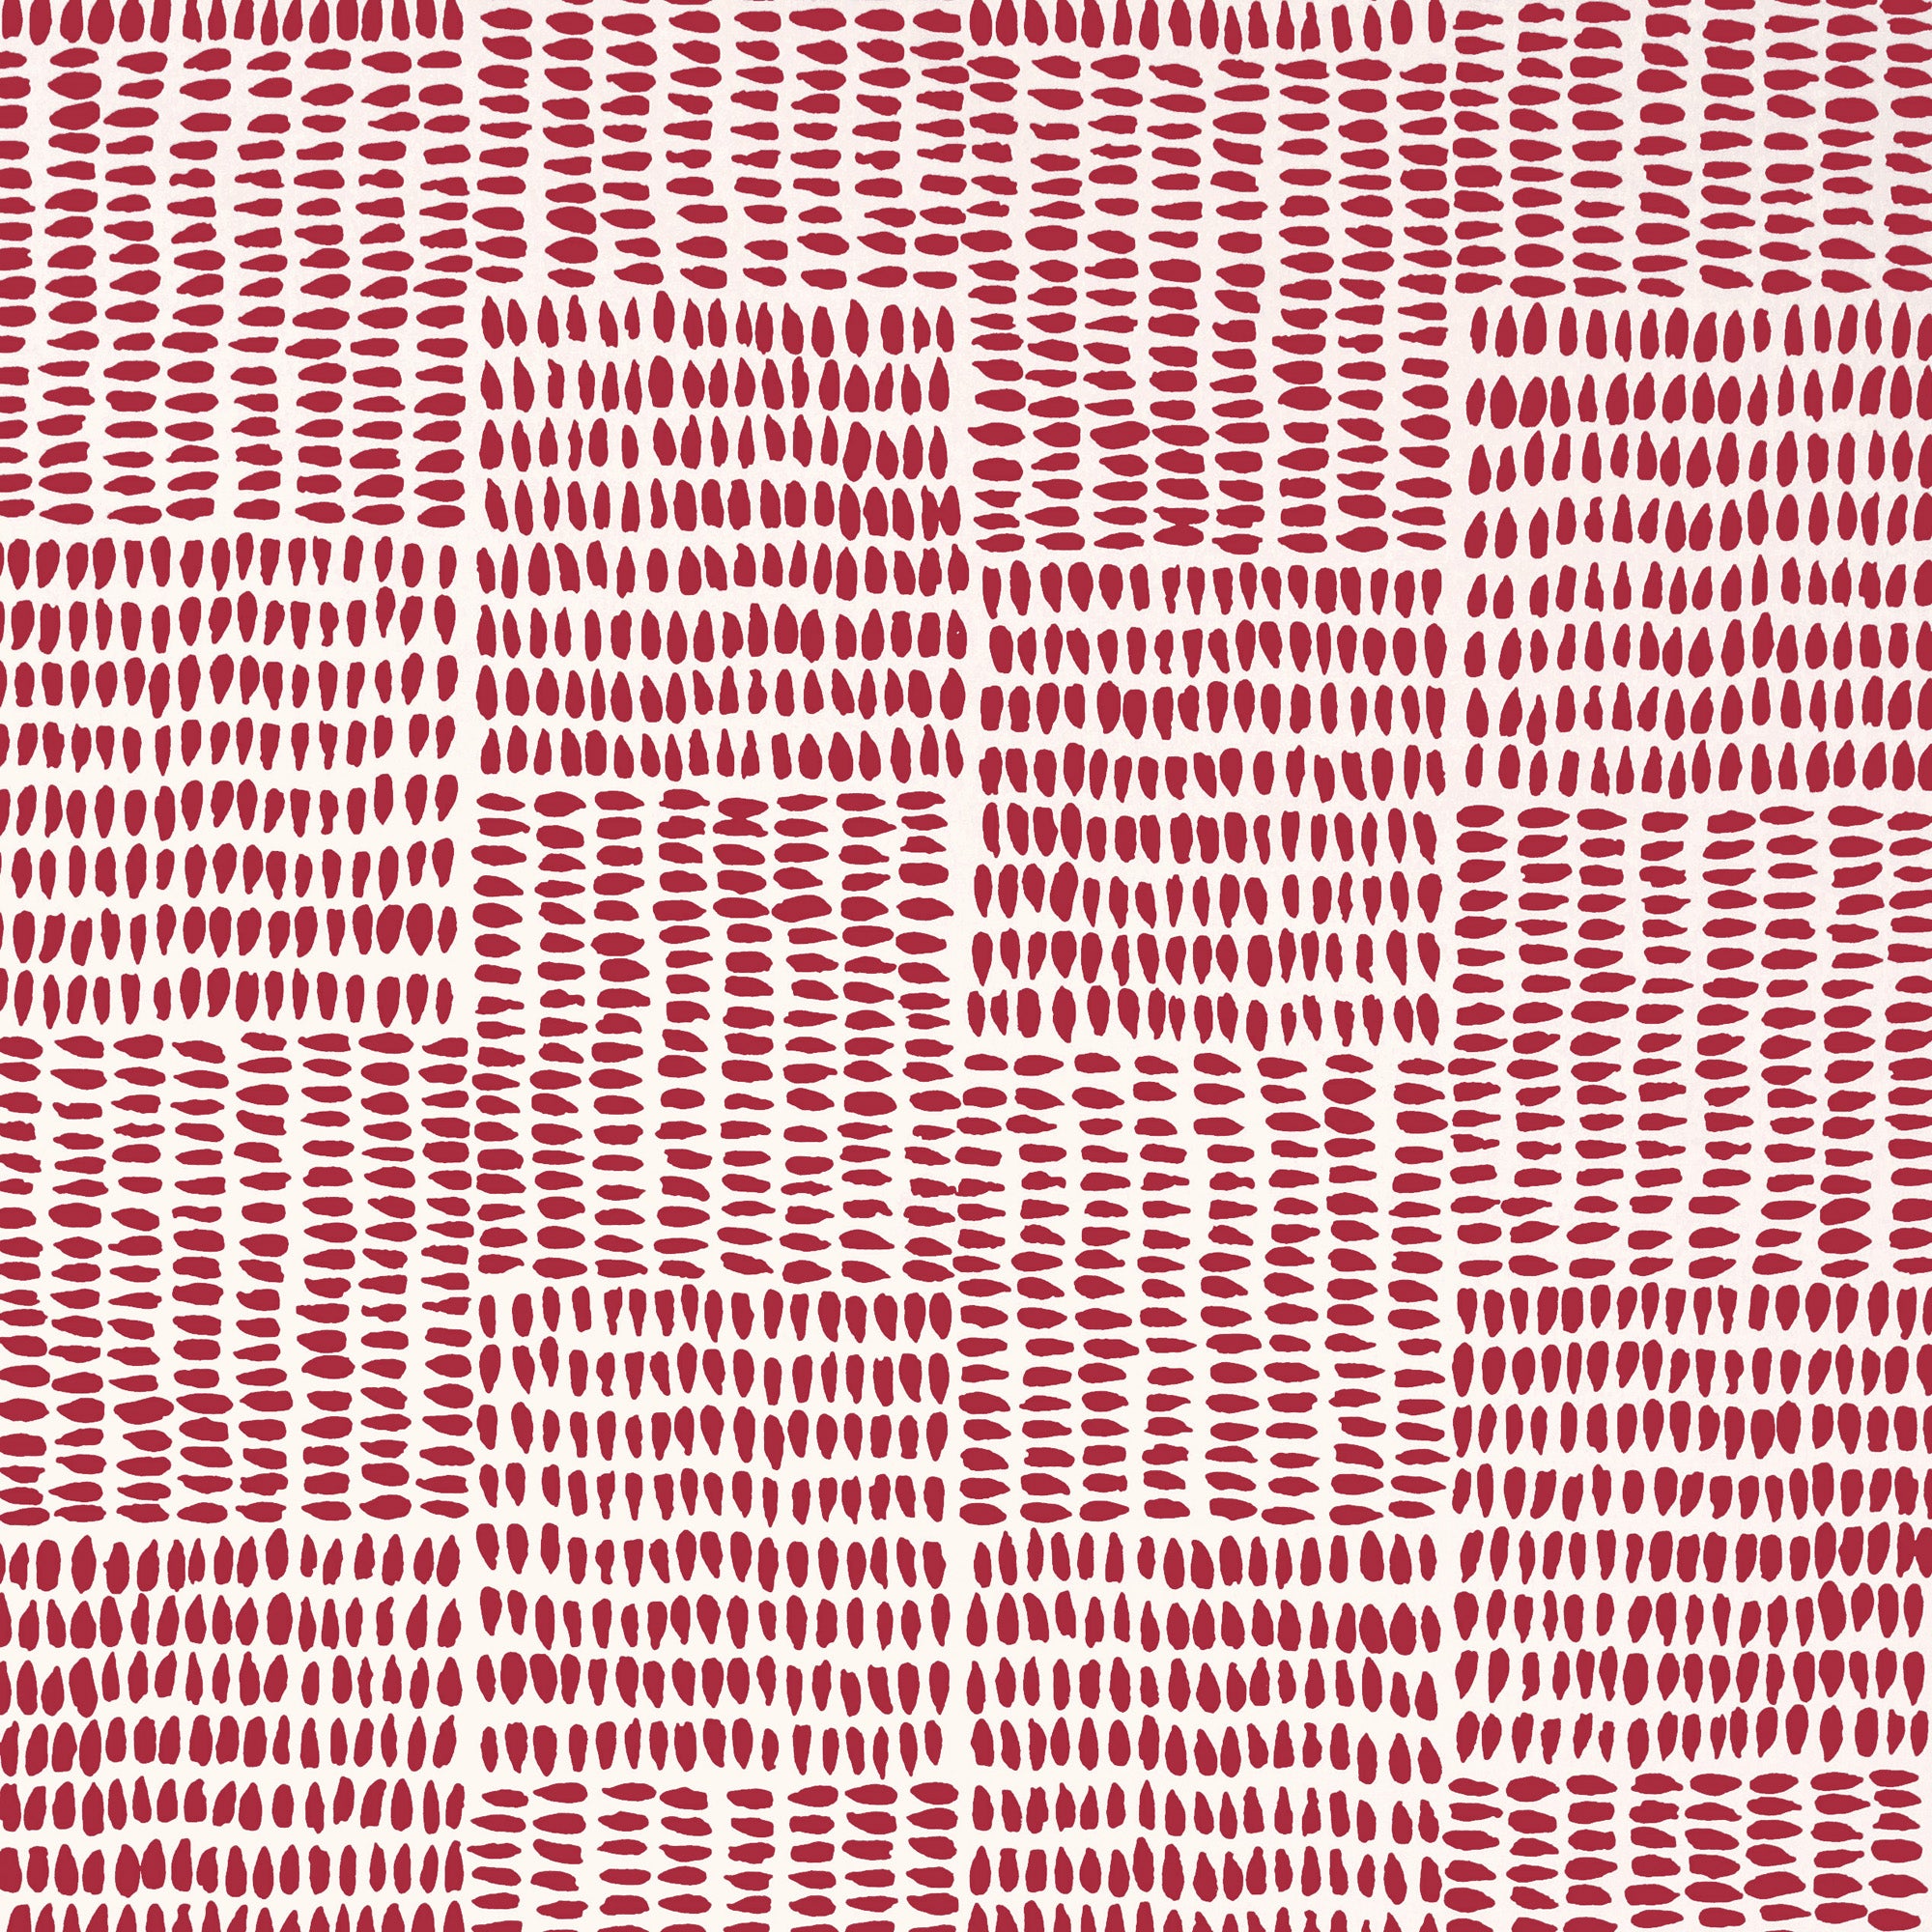 Swatch Set Popular Fabrics and Wallpapers